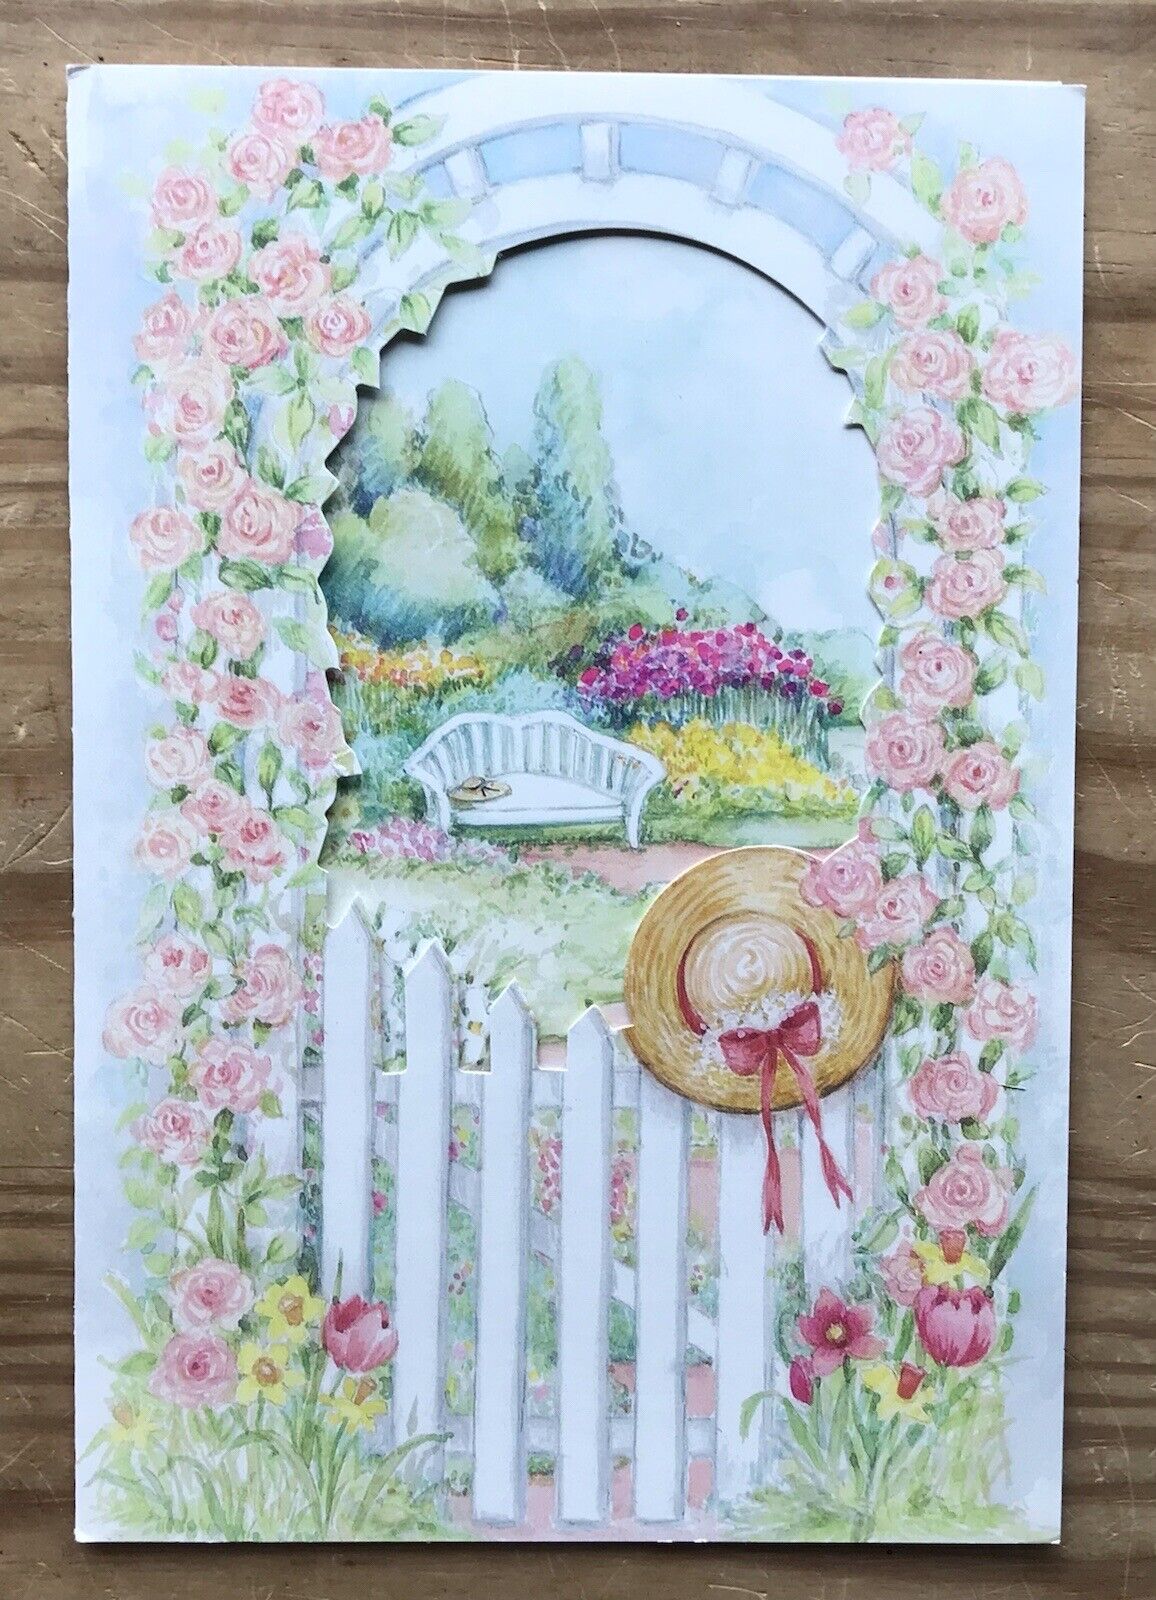 Vintage Olympicard White Pocket Fence Garden Gate Straw Hat Get Well Card